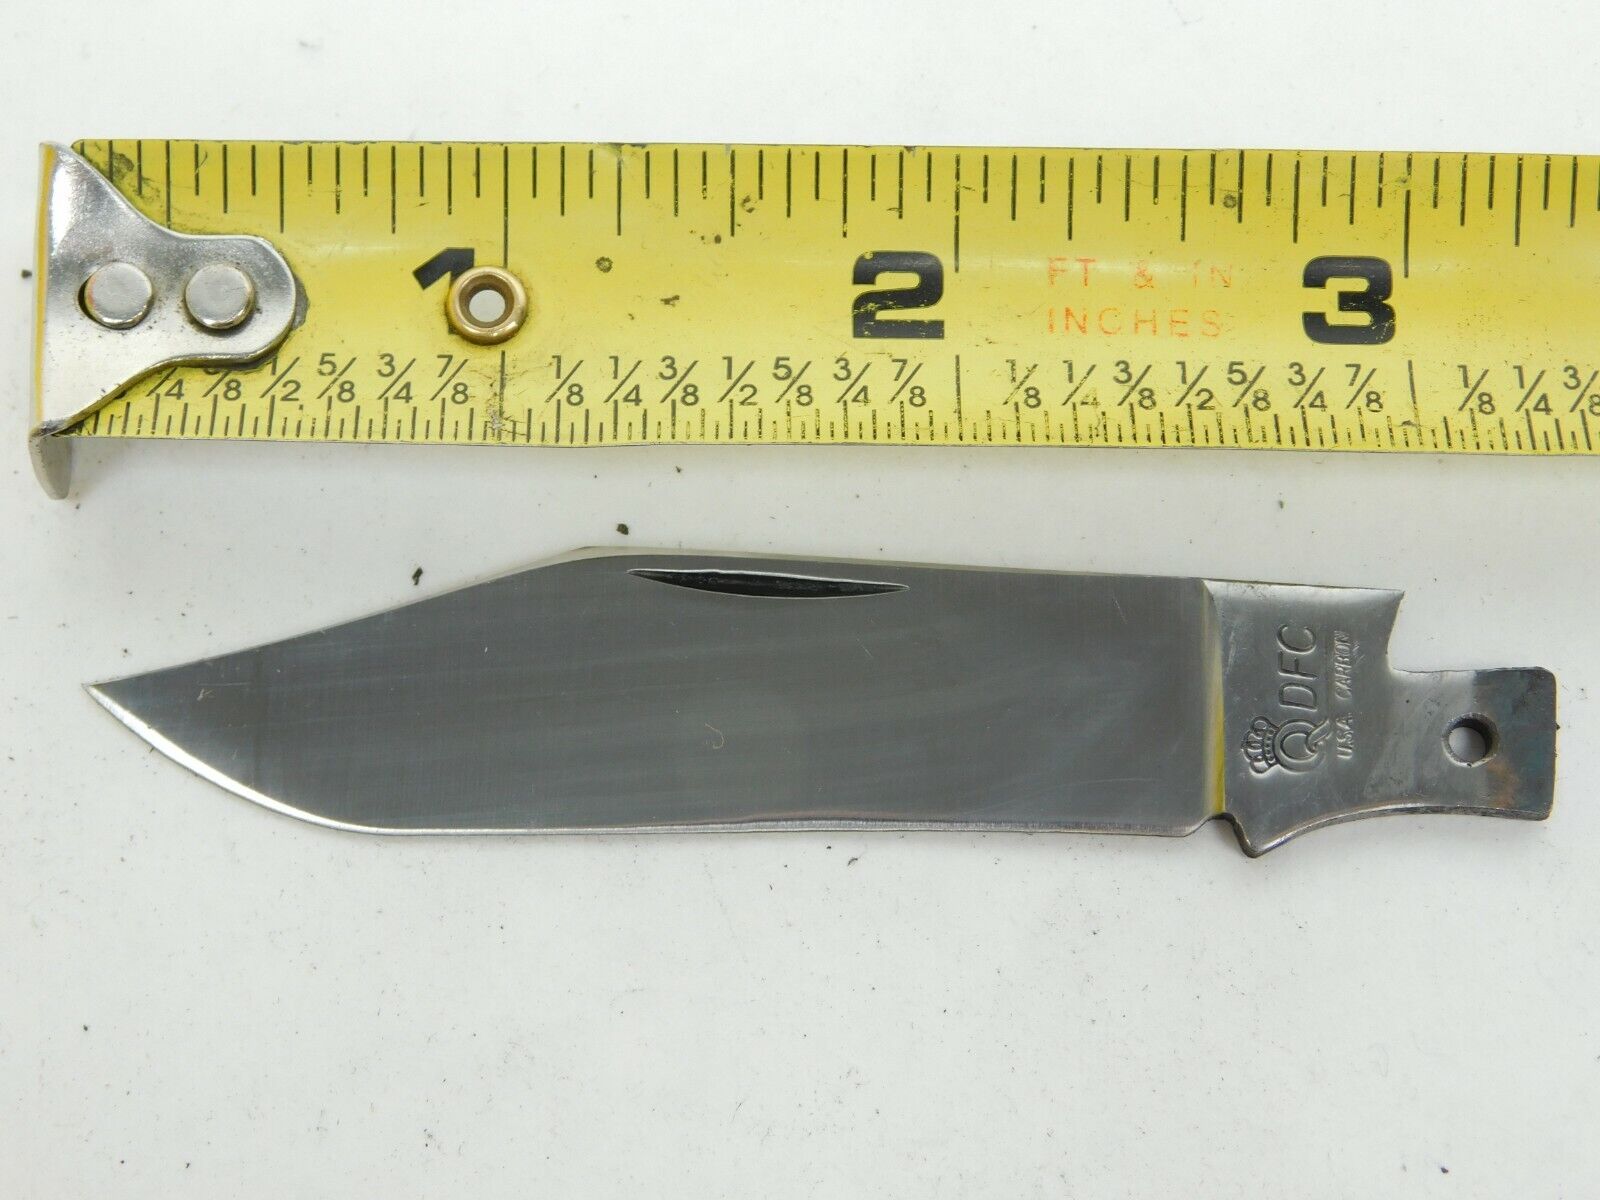 REPLACEMENT CLIP BLADE QUEEN DFC #69 Barlow Folding Pocket KNIFE  (QC)